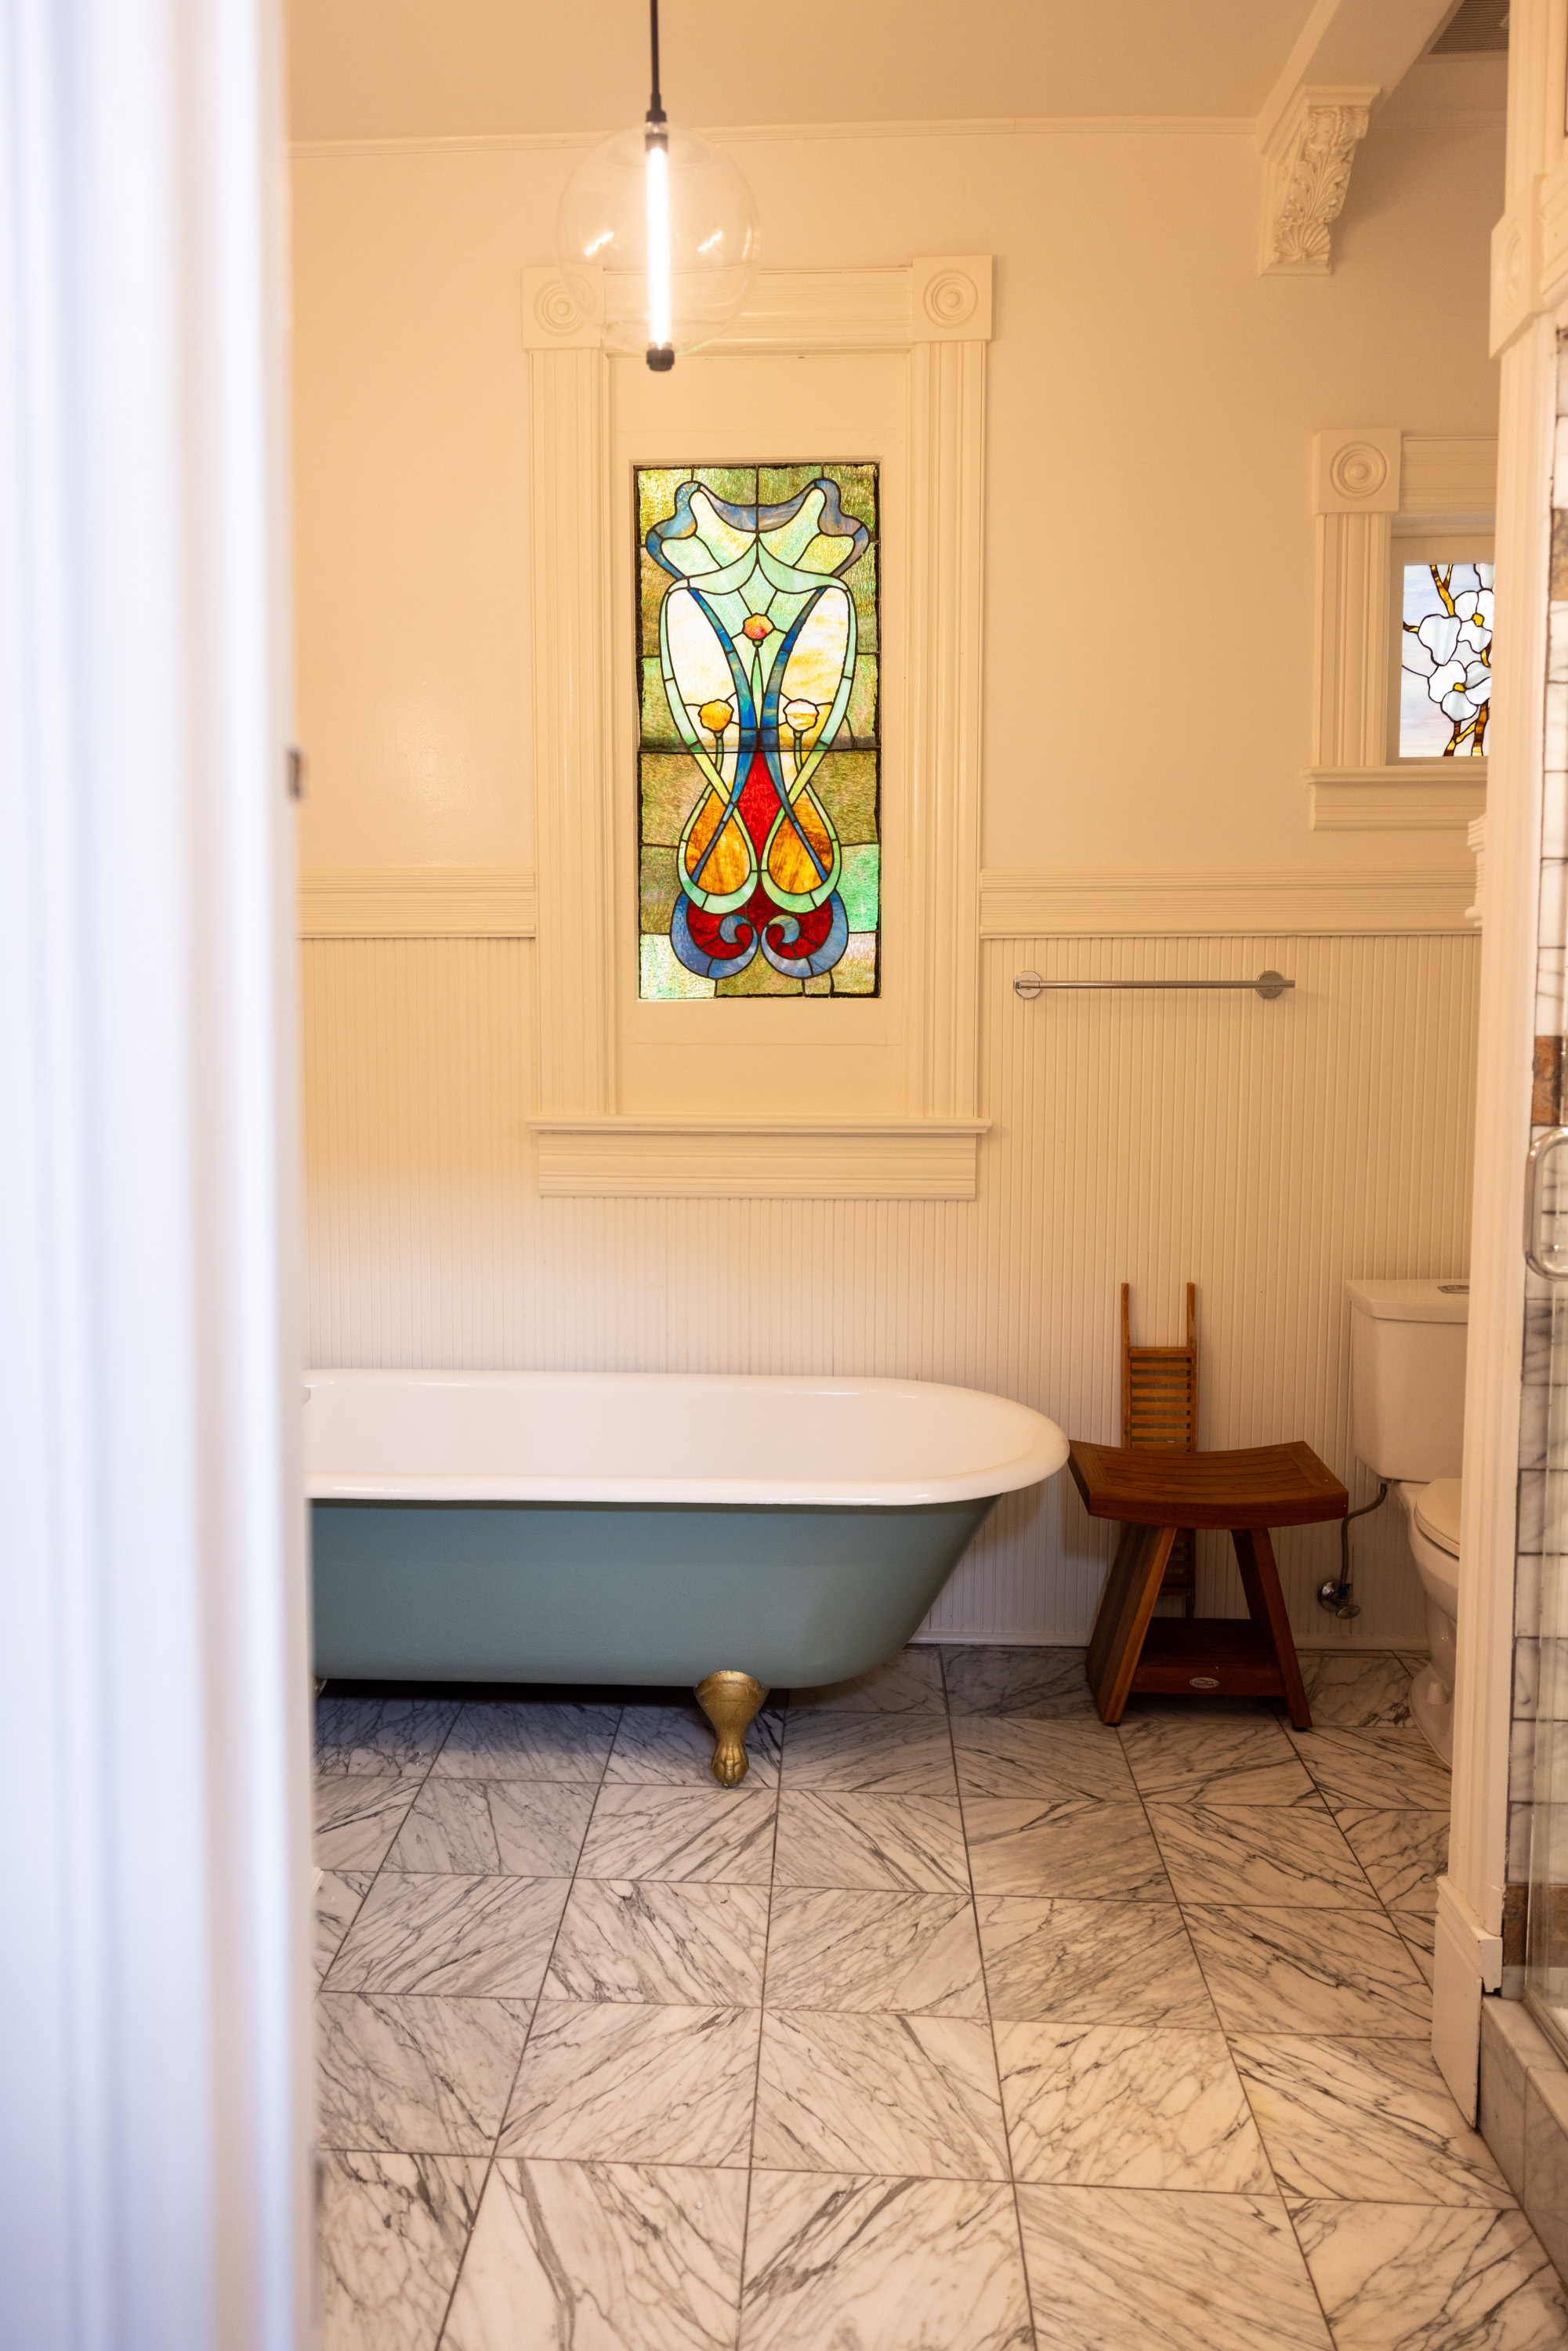 The image features a bathroom with a vintage bathtub on golden legs, marble floor, stained glass window, and a wooden chair beside a white toilet under soft lighting.